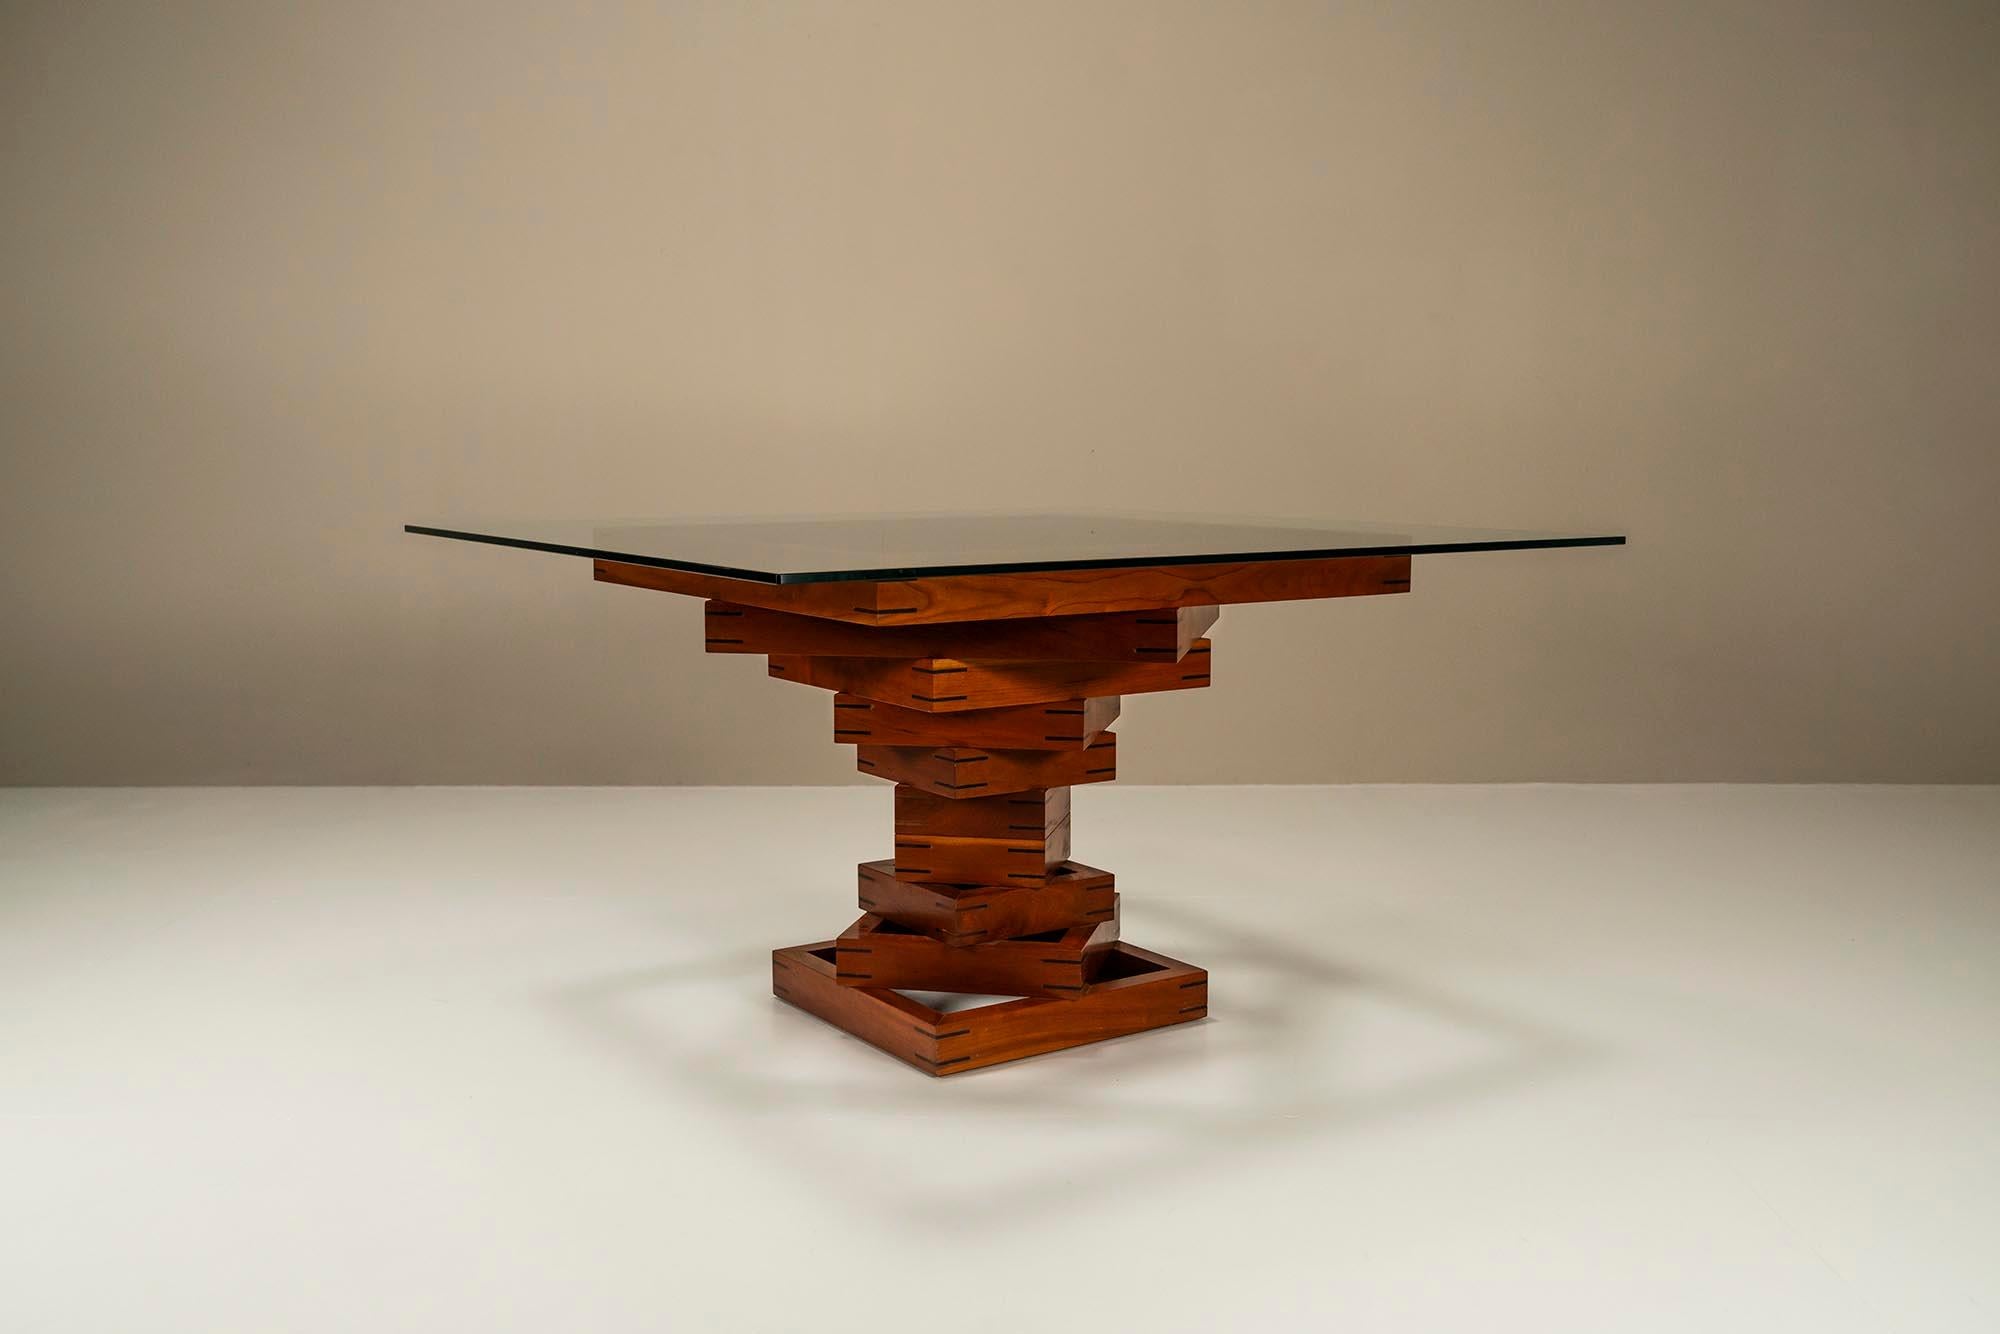 Dining table model “Corinto” by Ferdinando Meccani for Meccani Arredamento.An anything but modest dining room table is the “Corinto” by the Italian designer Ferdinando Meccani. The table was designed in 1978 in tandem with the sideboard that bears